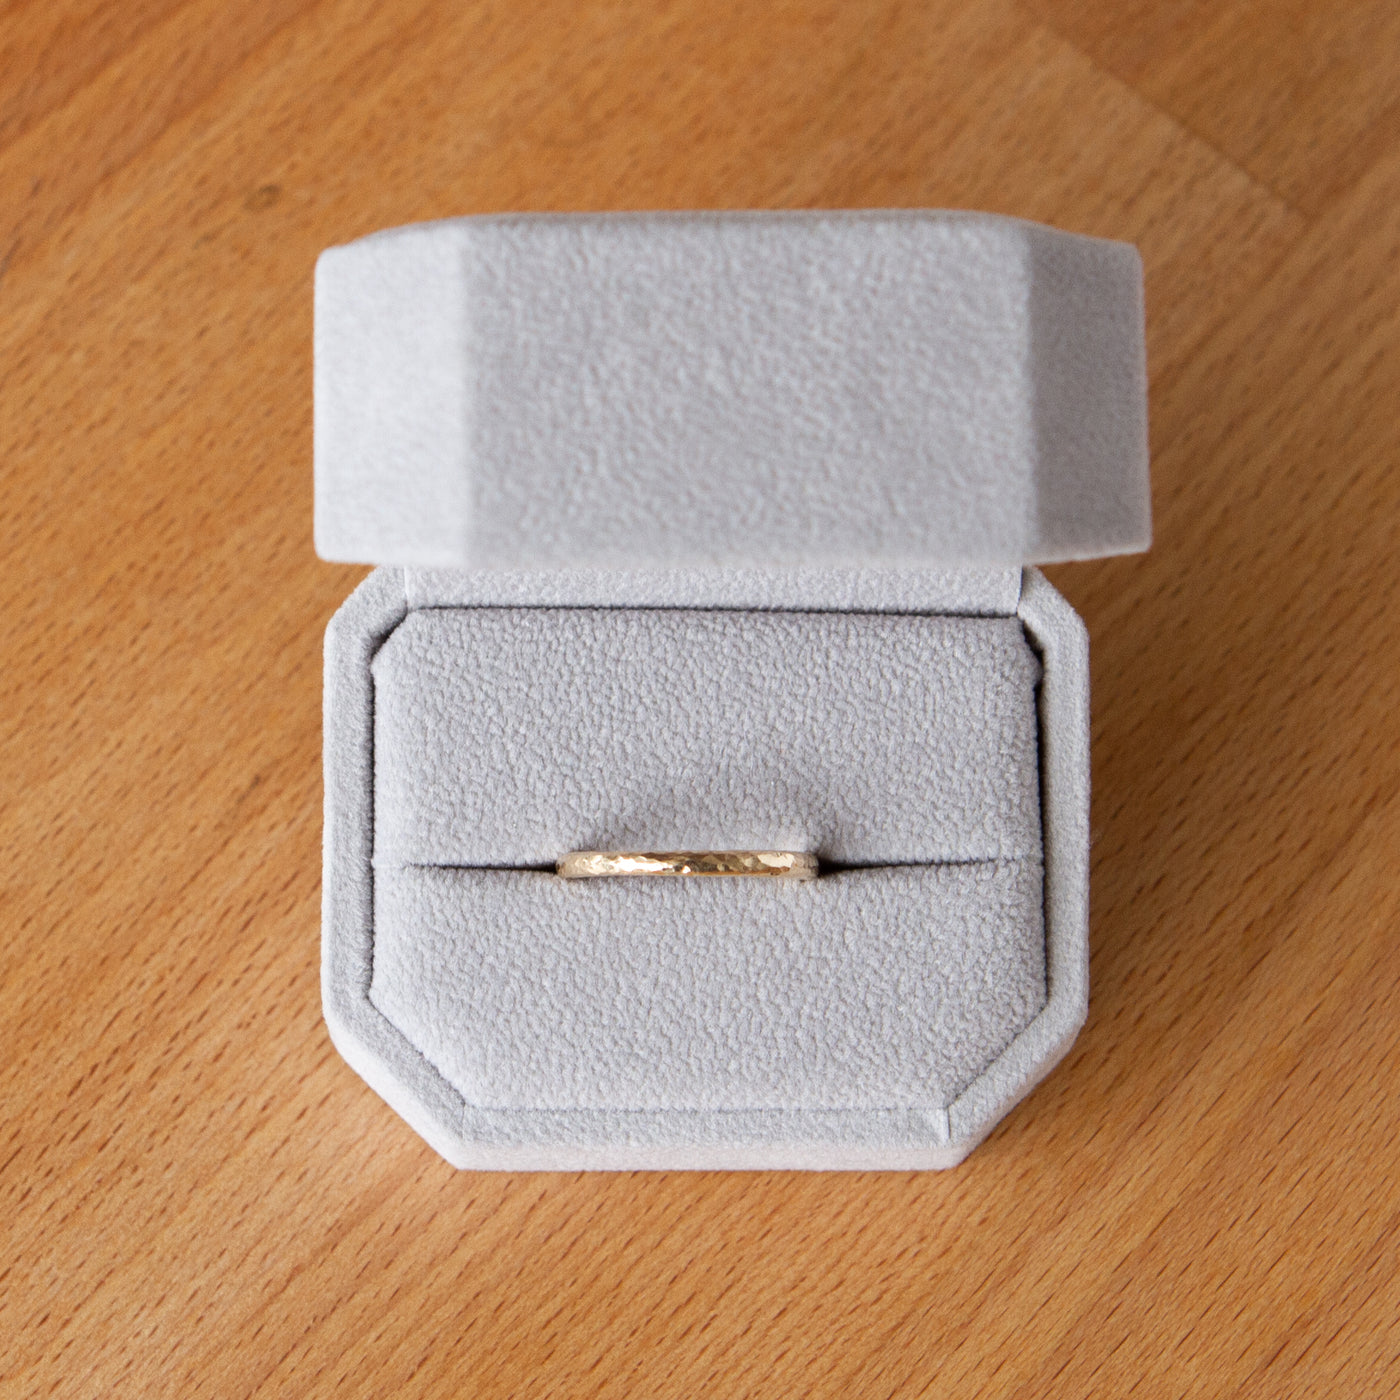 Blue ridge half round hammered yellow gold wedding band in a ring box